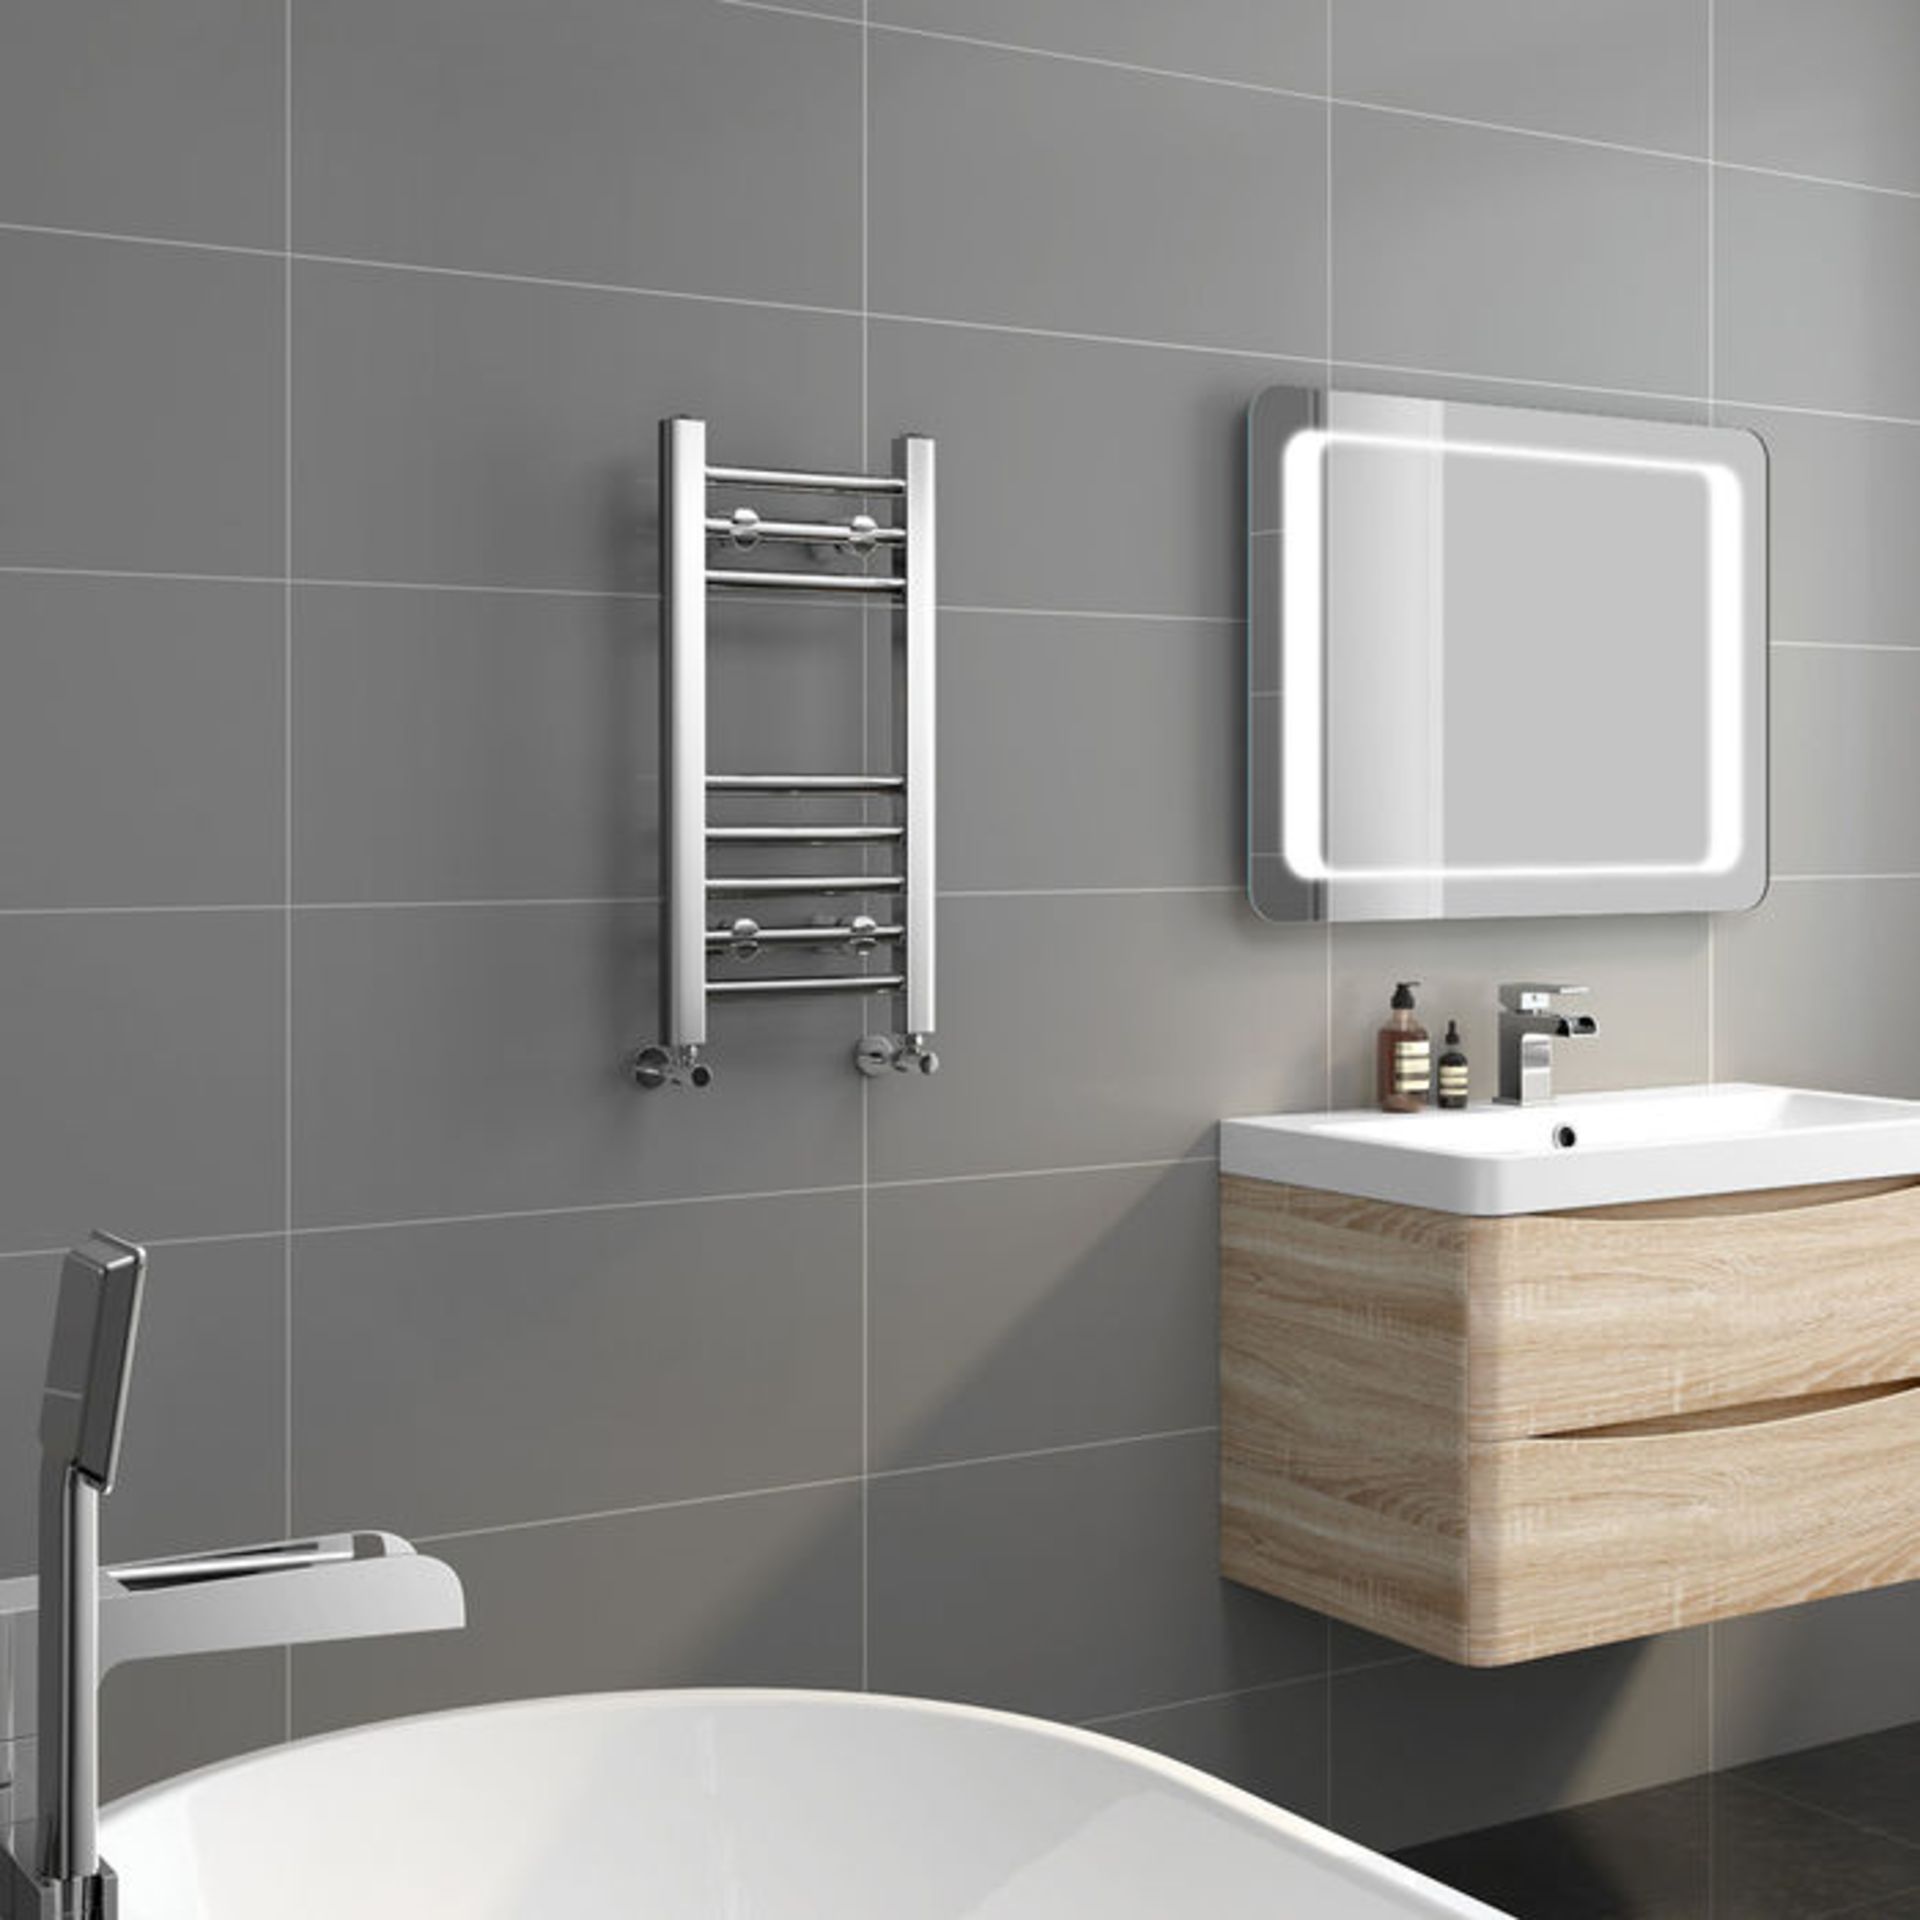 (G2) 600x300mm - 20mm Tubes - Chrome Heated Straight Rail Ladder Towel Rail. Low carbon steel chrome - Image 2 of 3